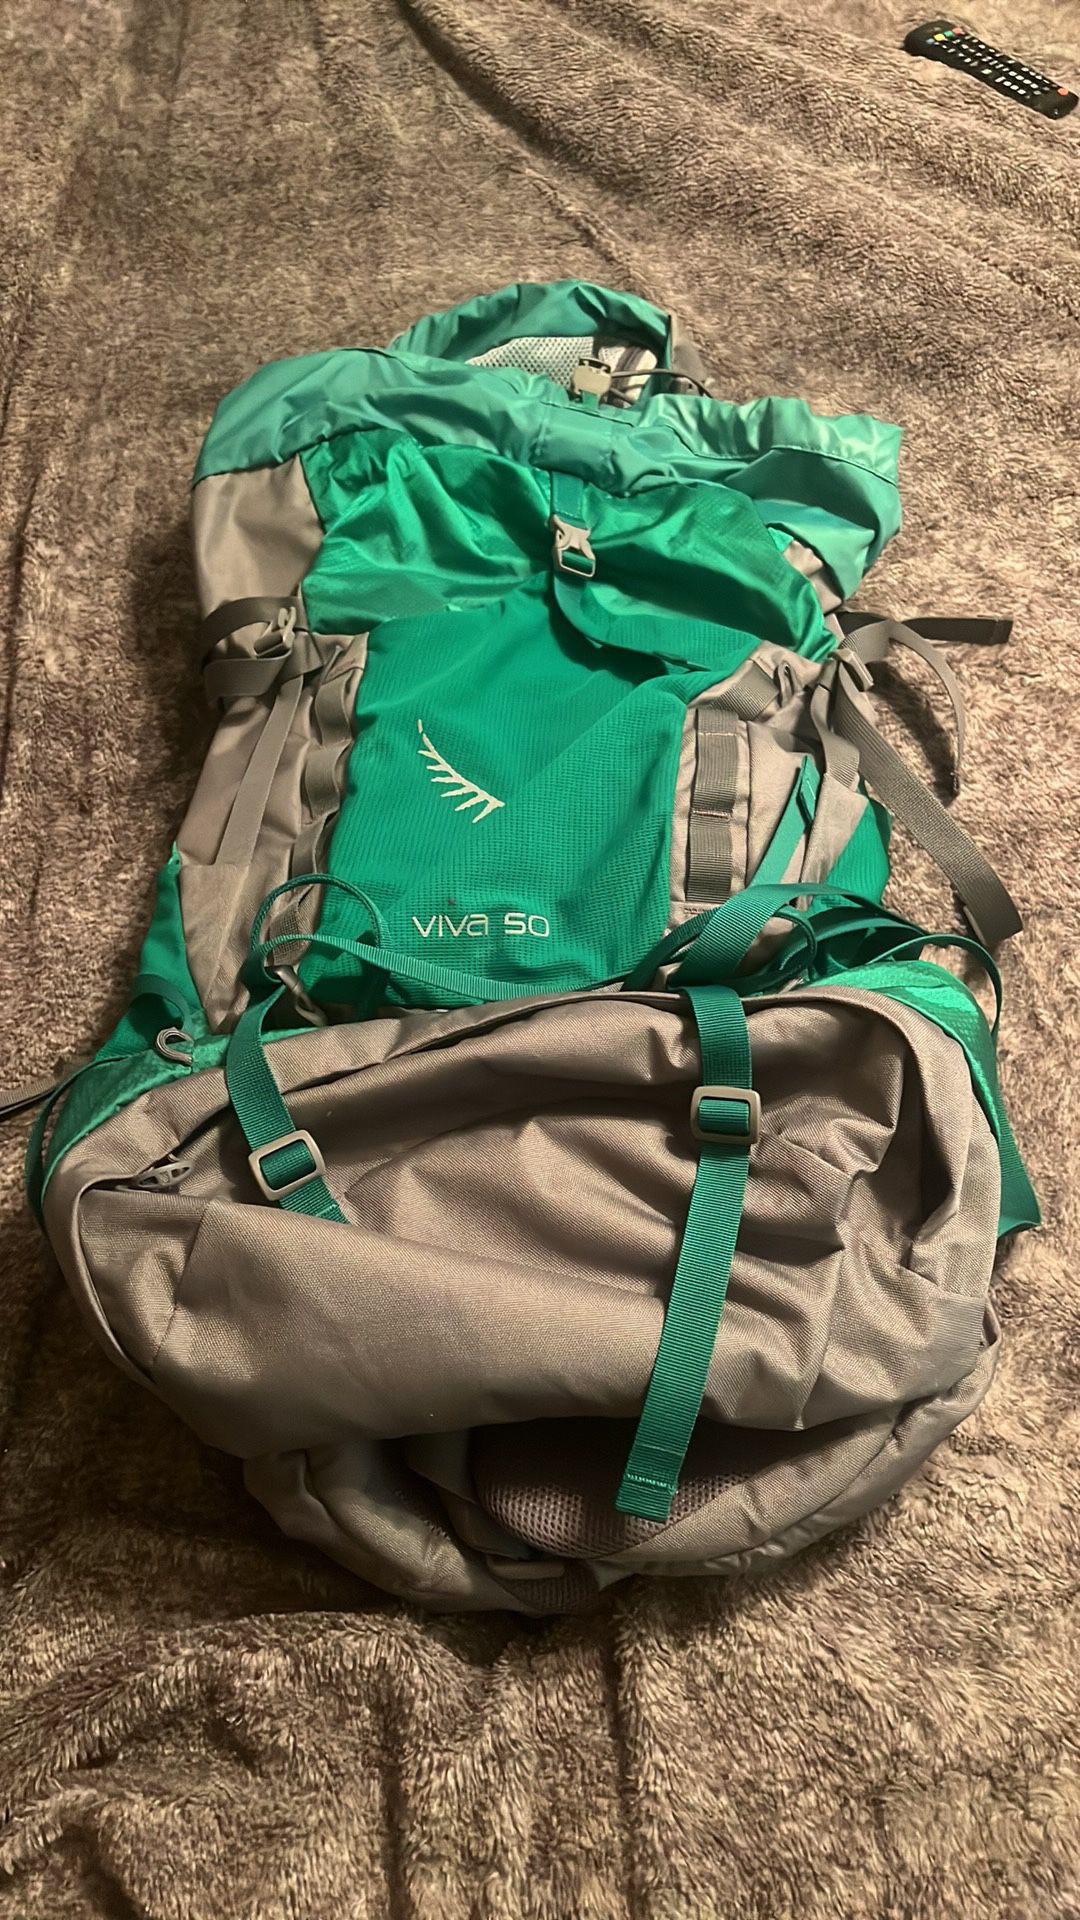 Osprey viva 50 hiking backpack great condition